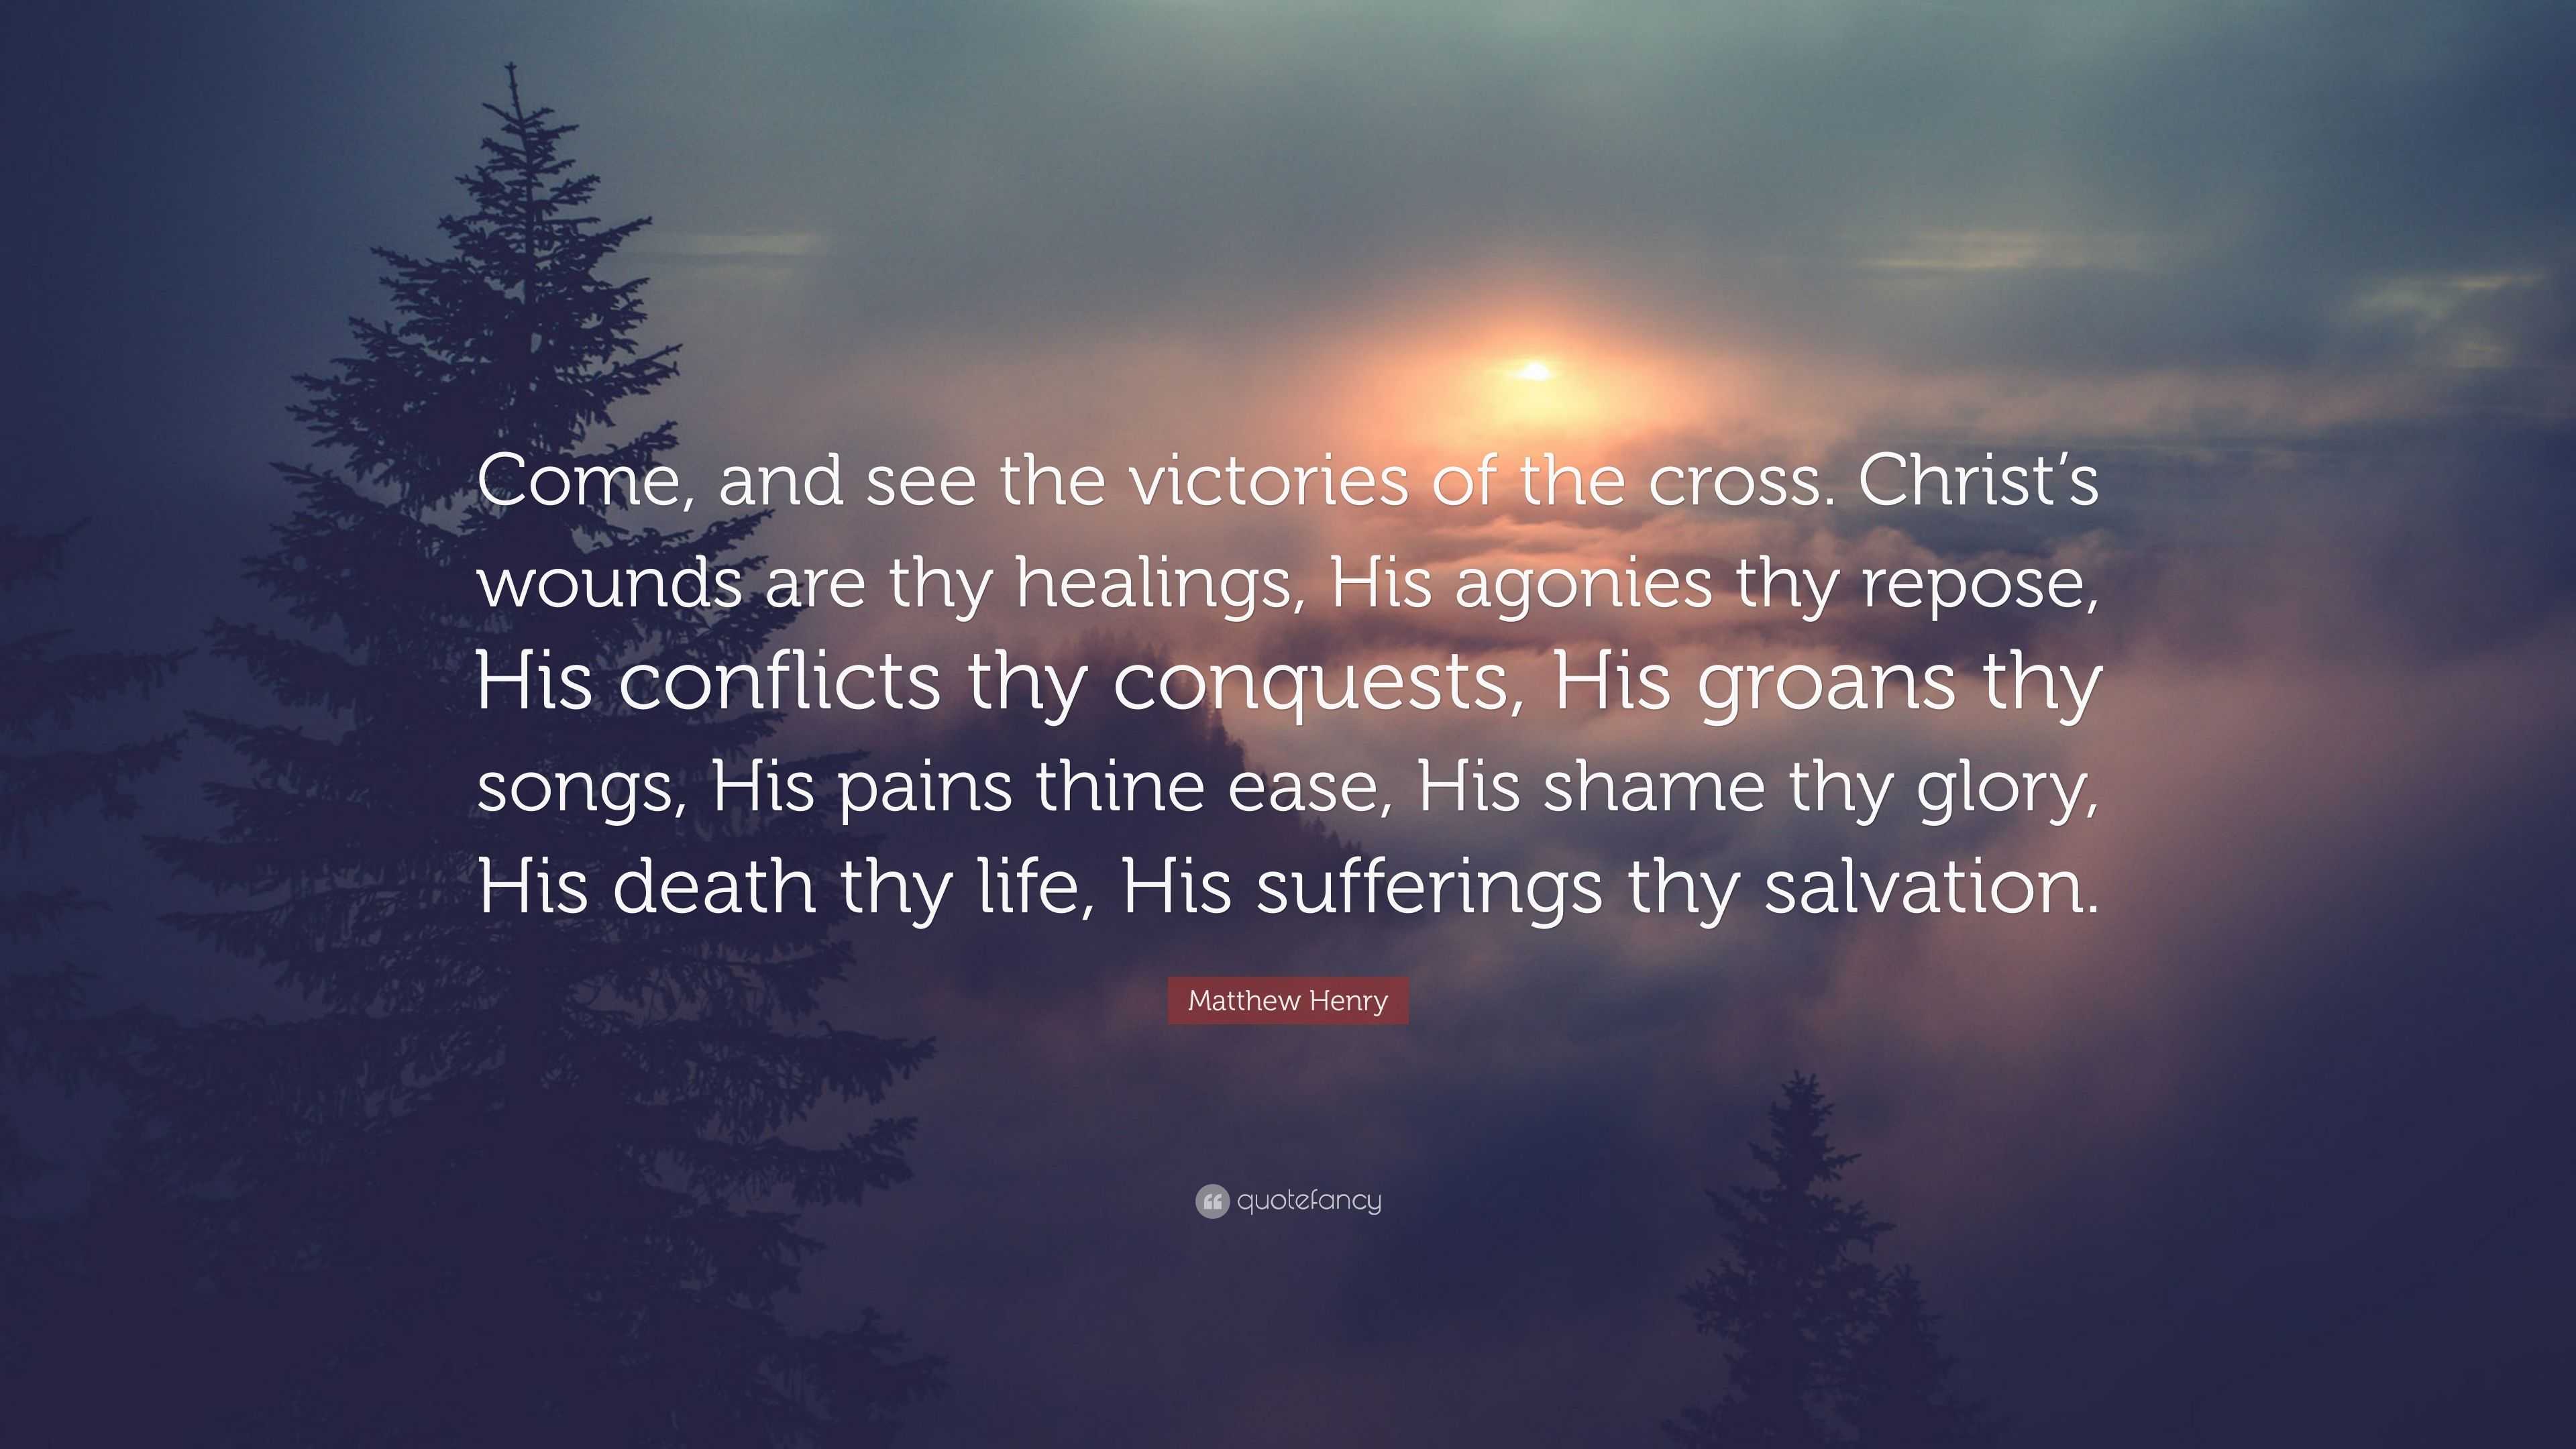 Matthew Henry Quote: “Come, and see the victories of the cross. Christ ...